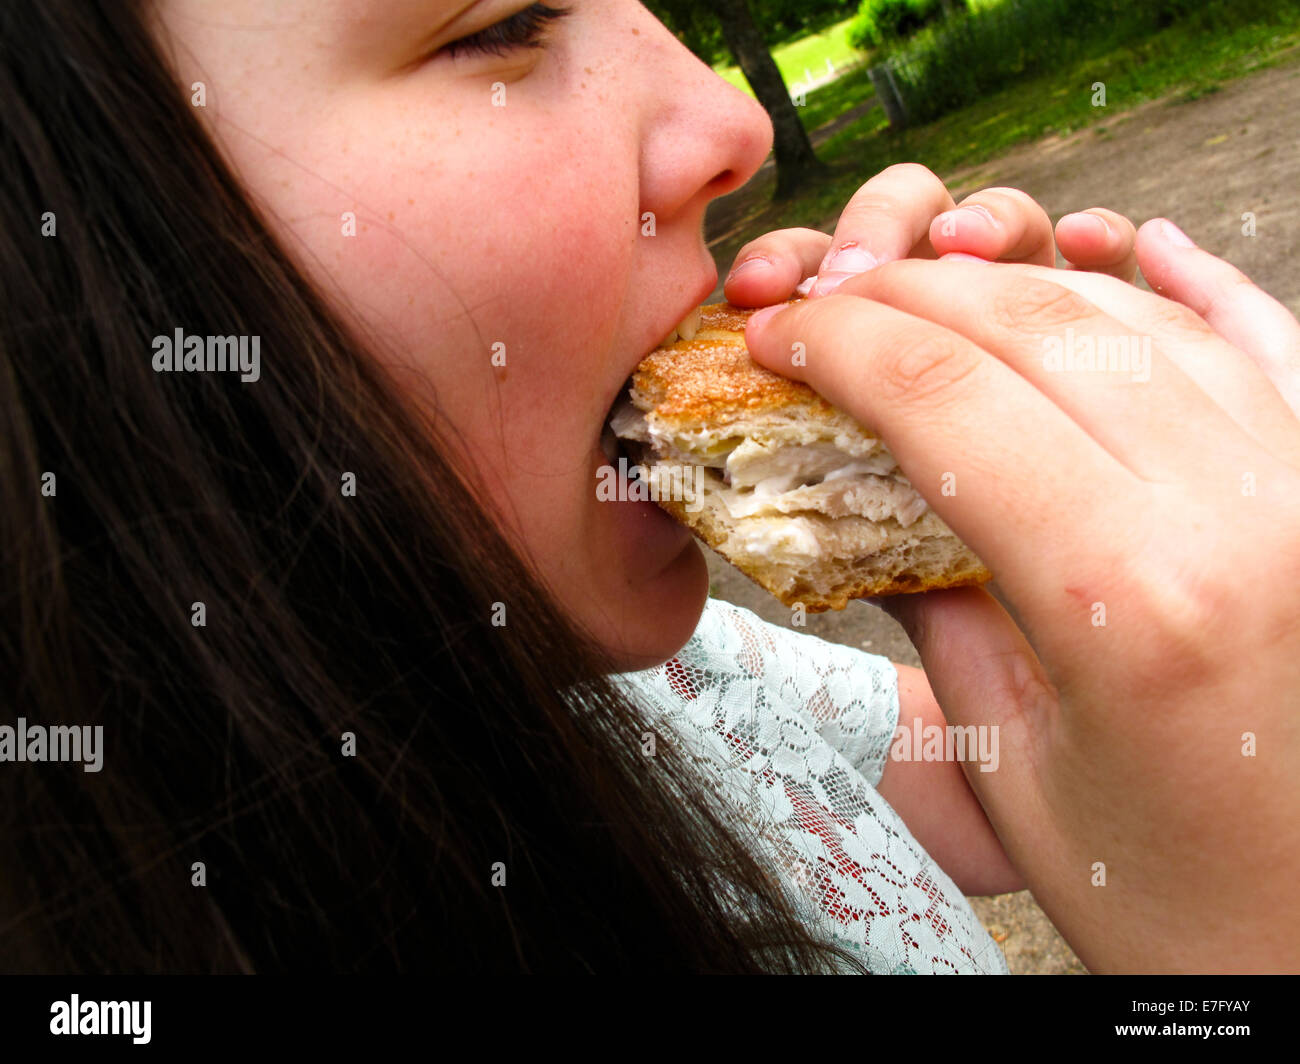 Young girl eating filled roll outside Stock Photo